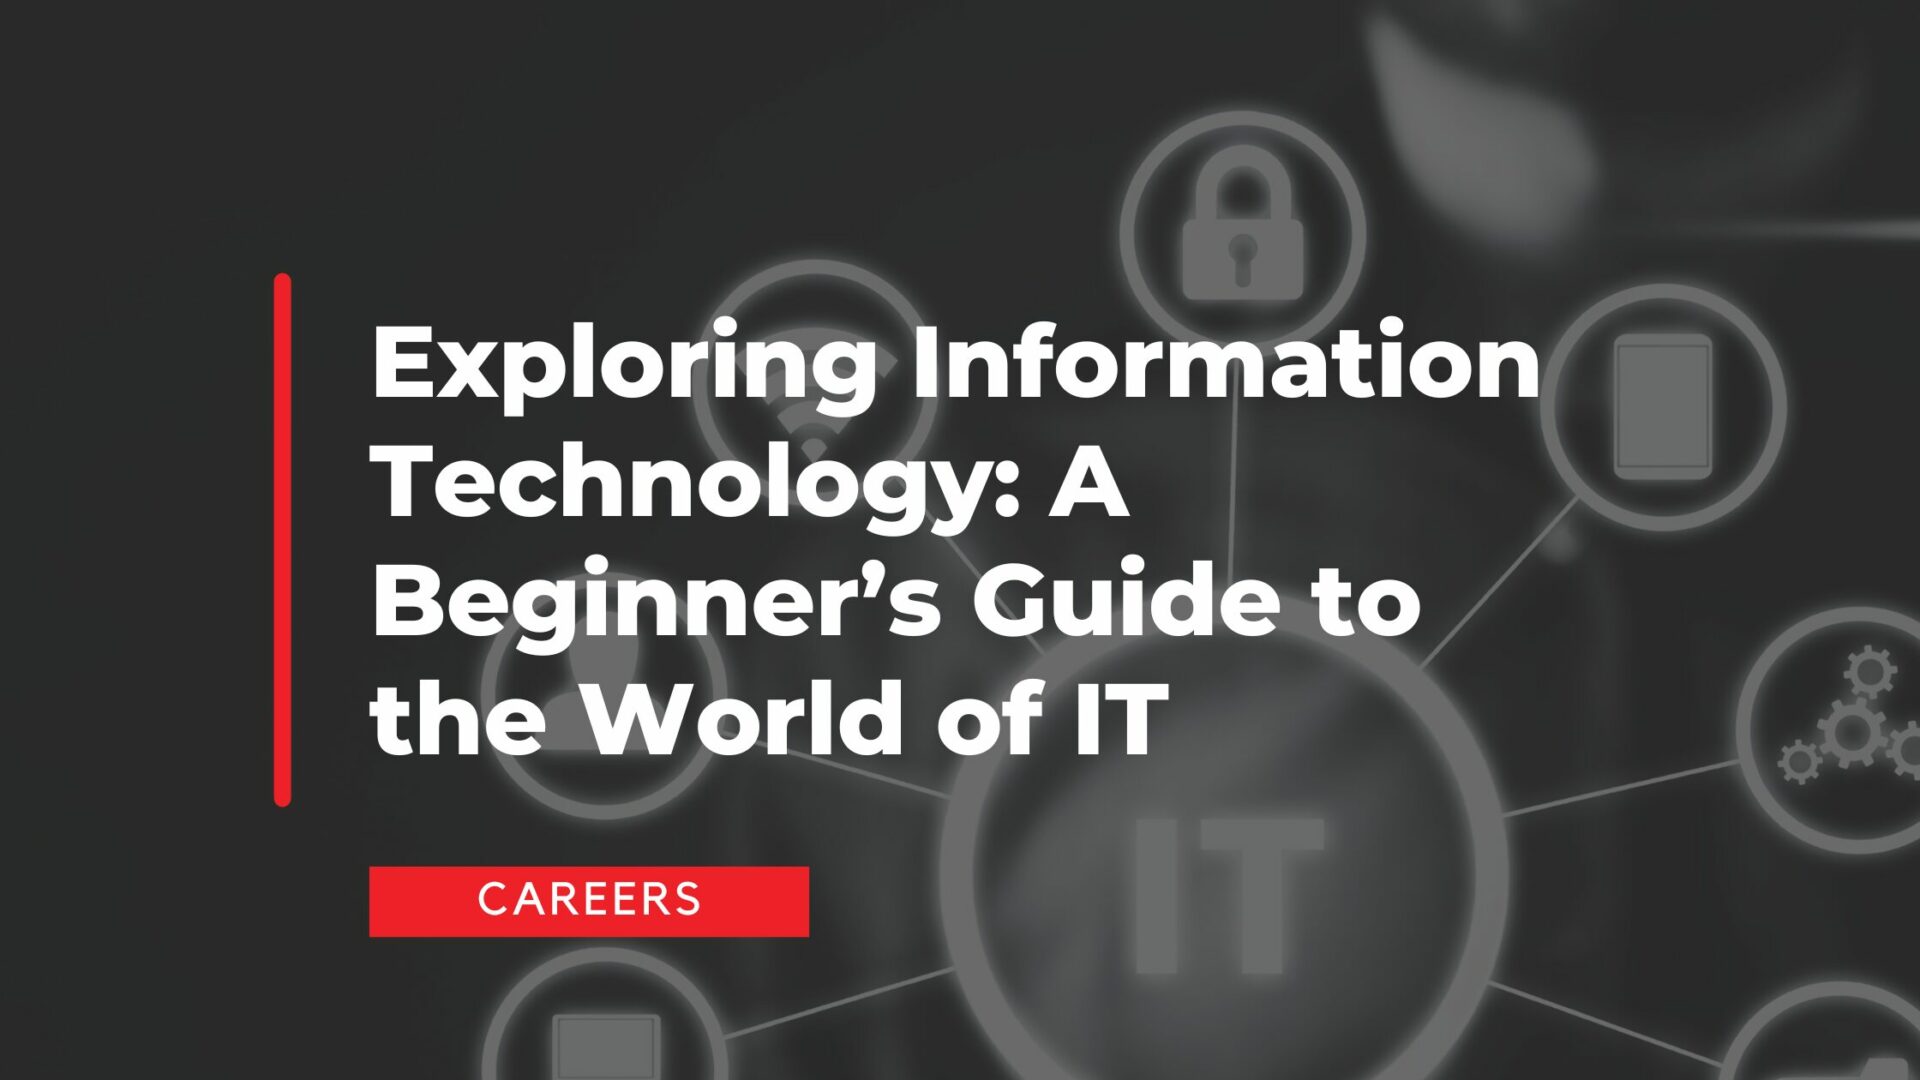 Exploring Information Technology: A Beginner’s Guide to the World of IT